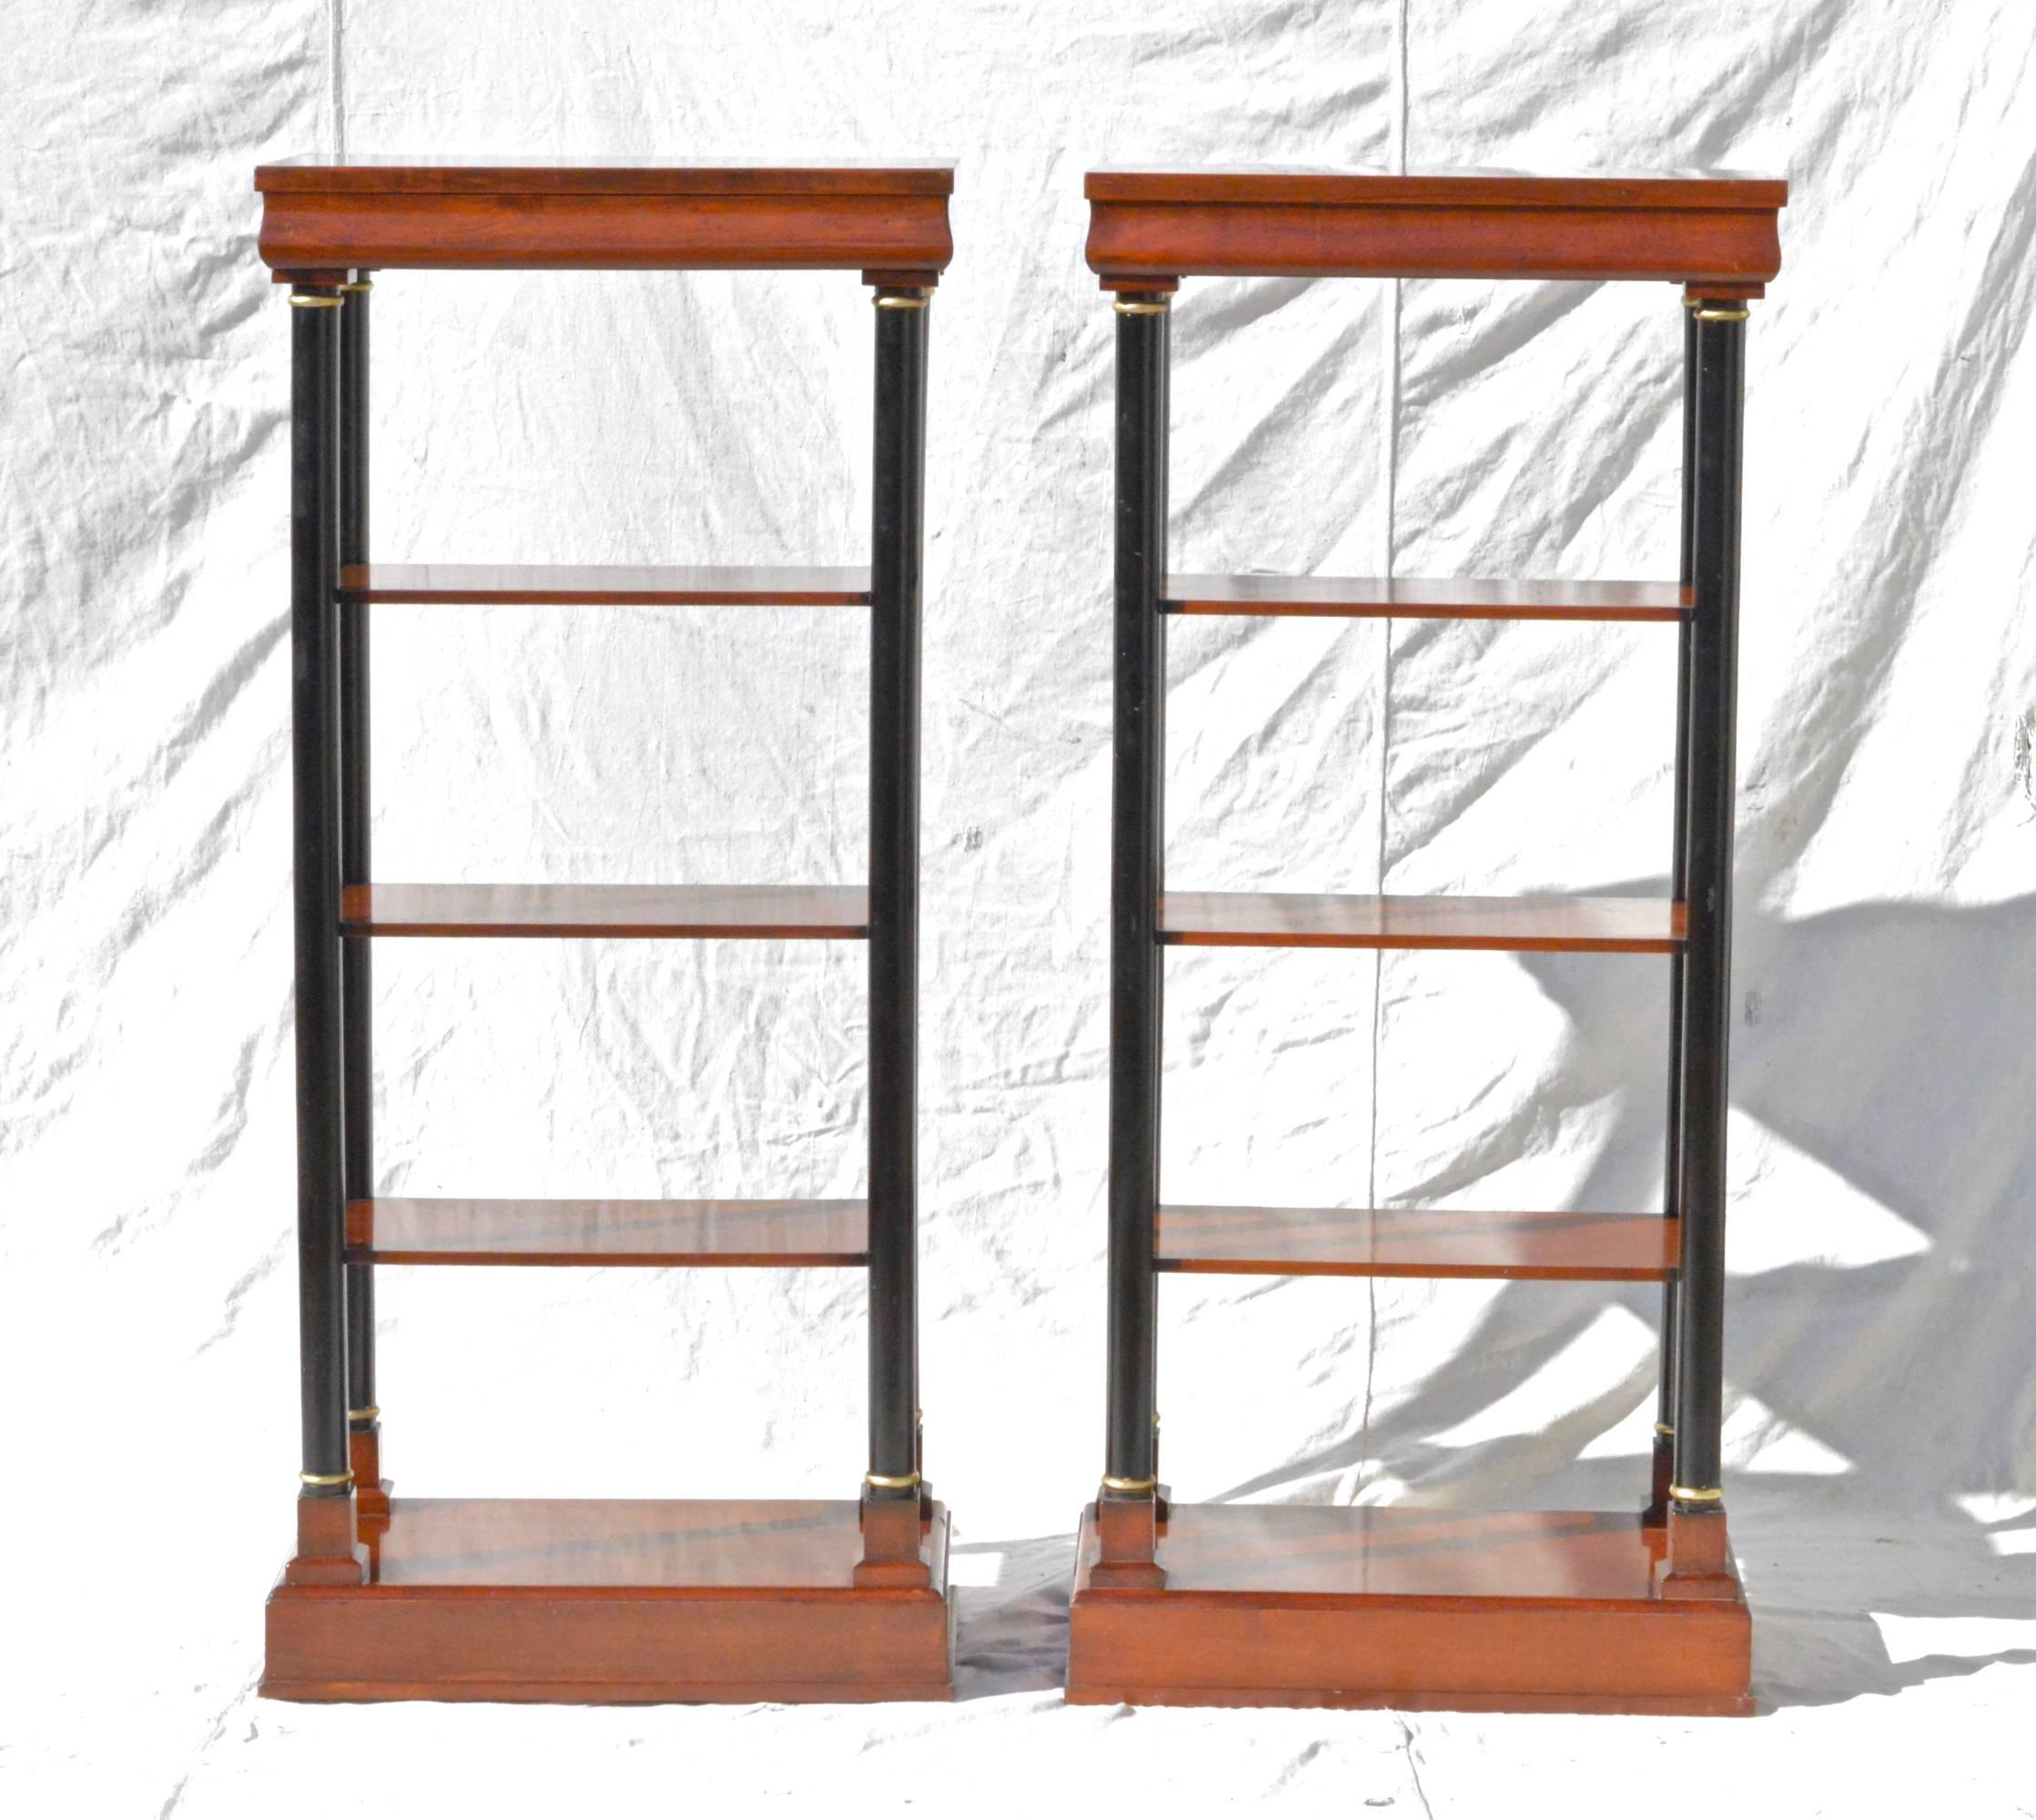 A pair of neoclassical styled Etagere in fruitwood having top drawers, three open shelves each, and a lower shelf that resides upon the base. The ebonized columns on each unit are visually striking and really give these vintage pieces a tremendous